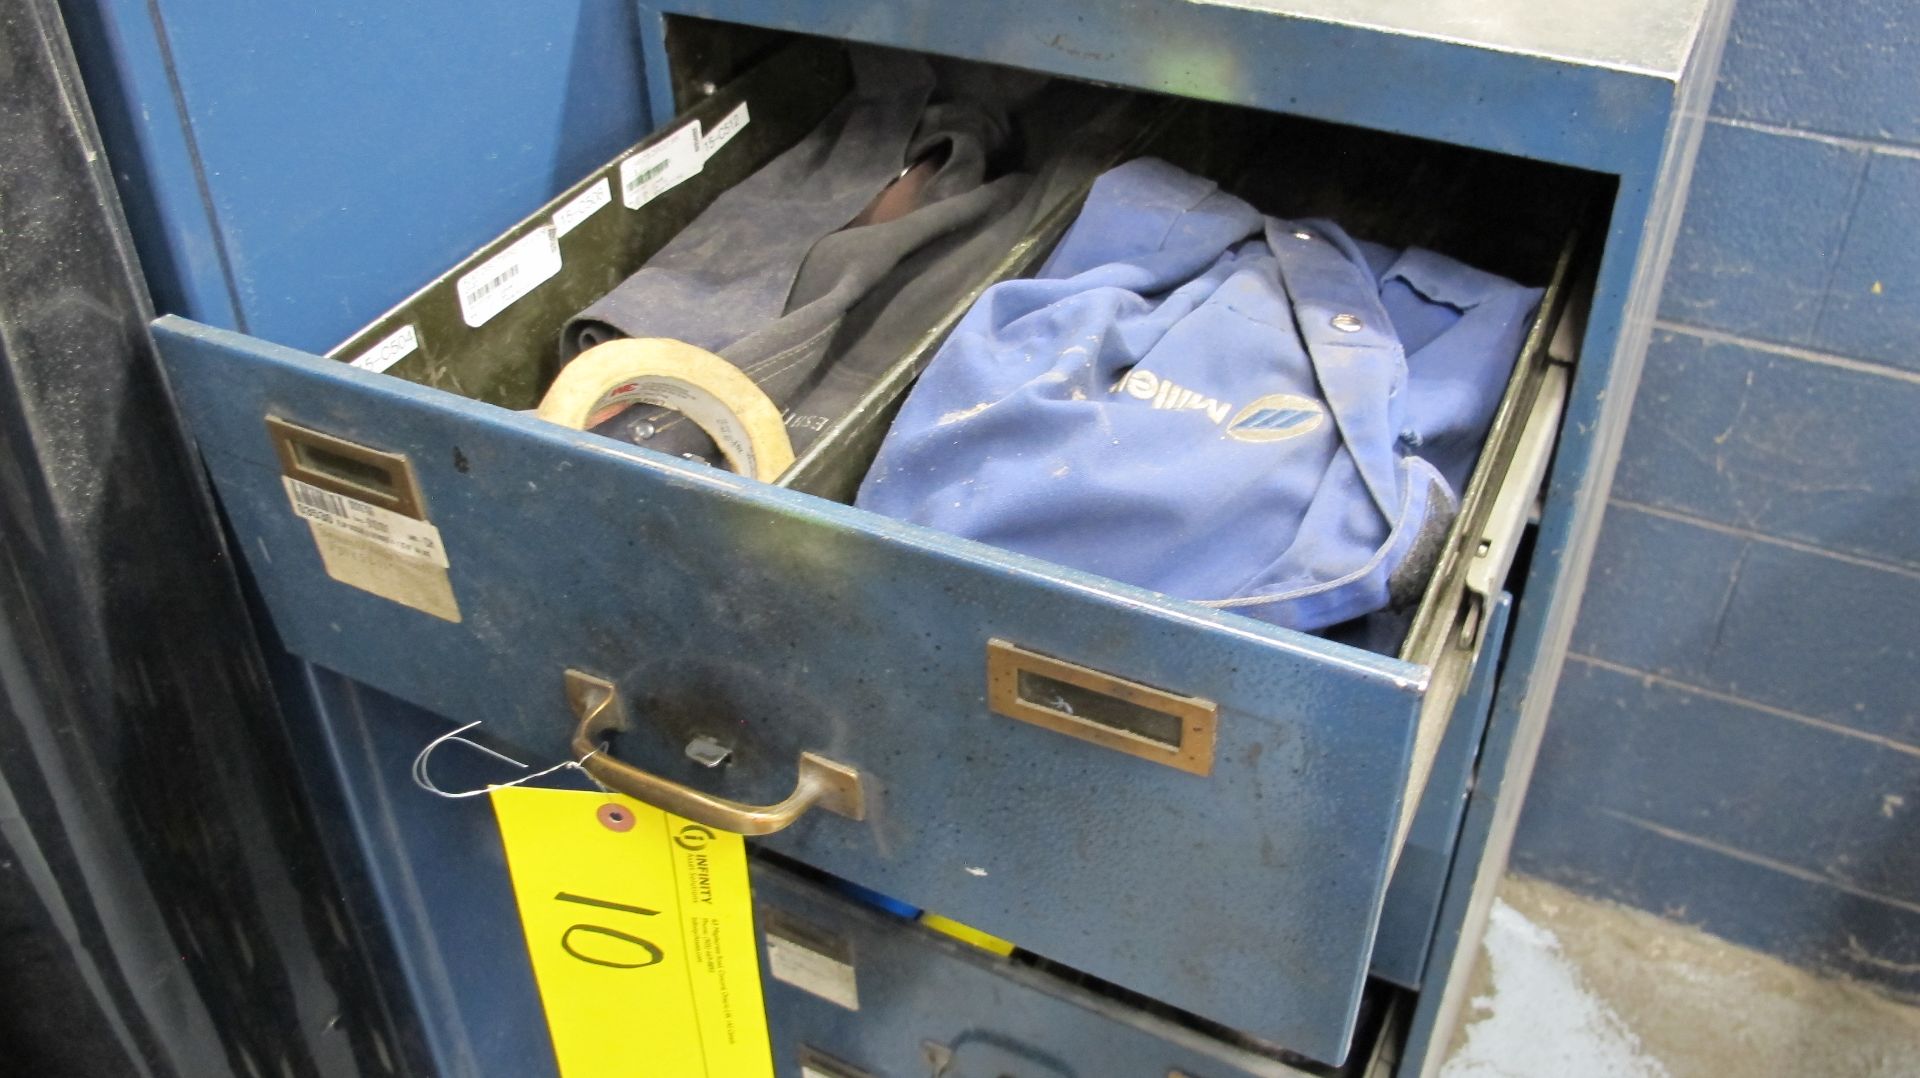 LOT OF WELDING ELECTRODES IN 10-LEVEL STORAGE CABINET AND WELDING SUPPLIES IN 2ND 10-LEVEL STORAGE - Image 11 of 14